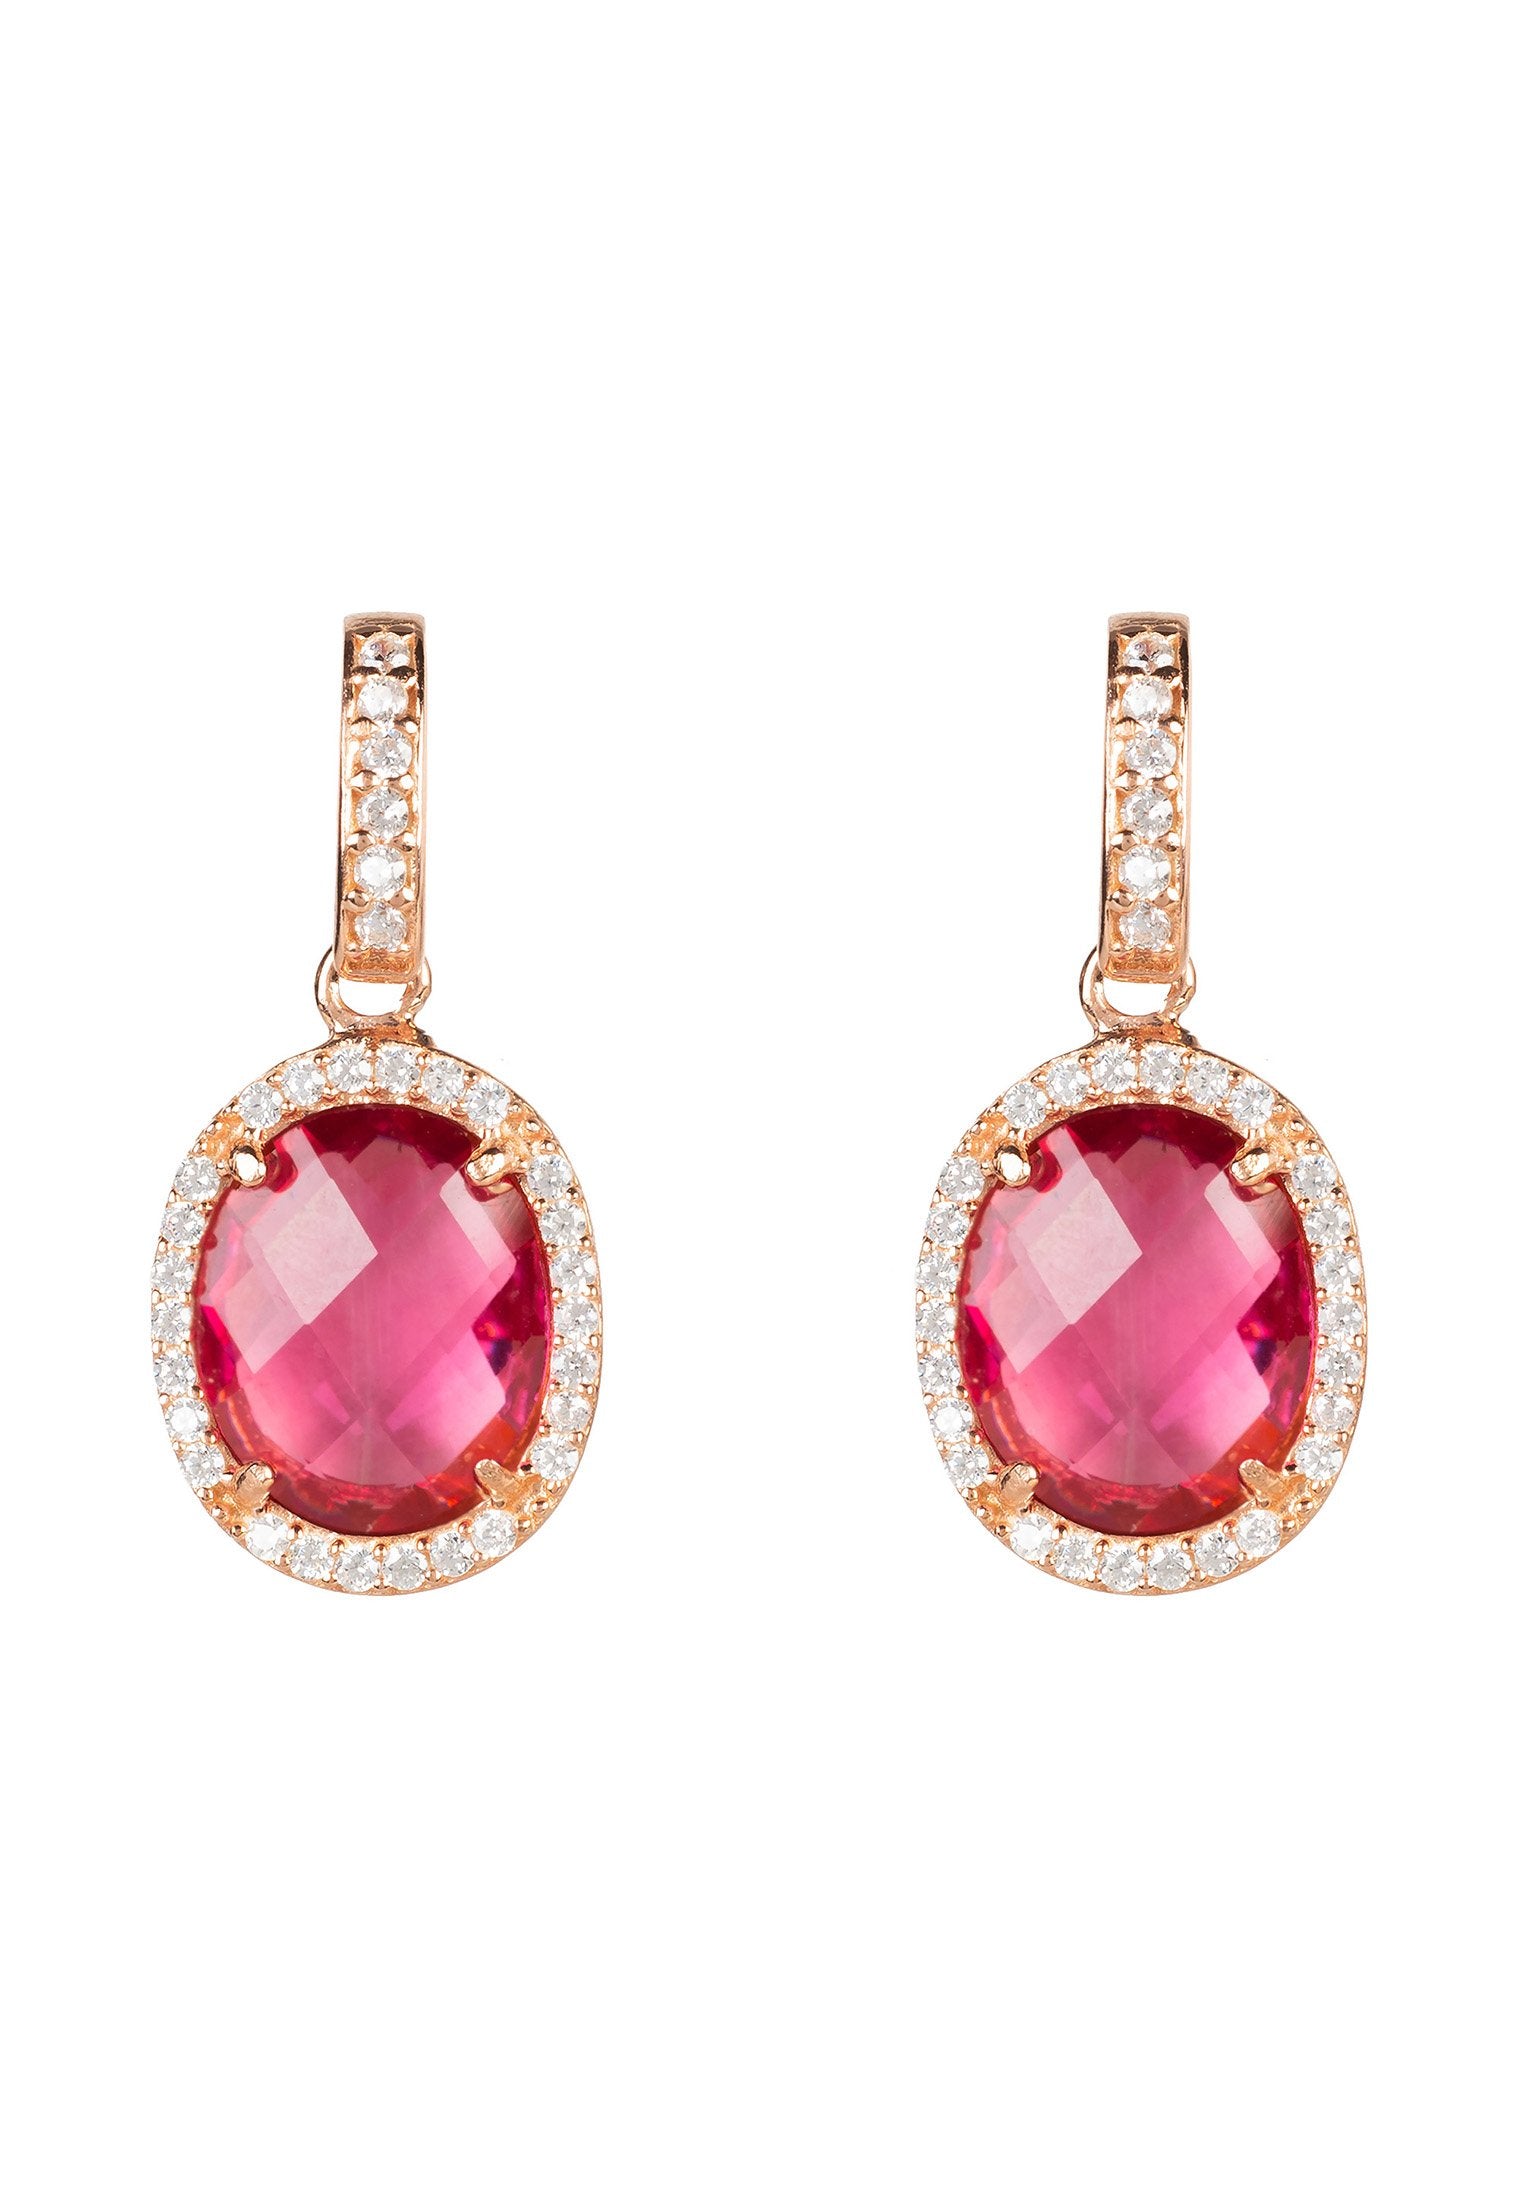 Regal Oval Gemstone Drop Earrings in Rose Gold with Pink Tourmaline - Jewelry & Watches - Bijou Her -  -  - 